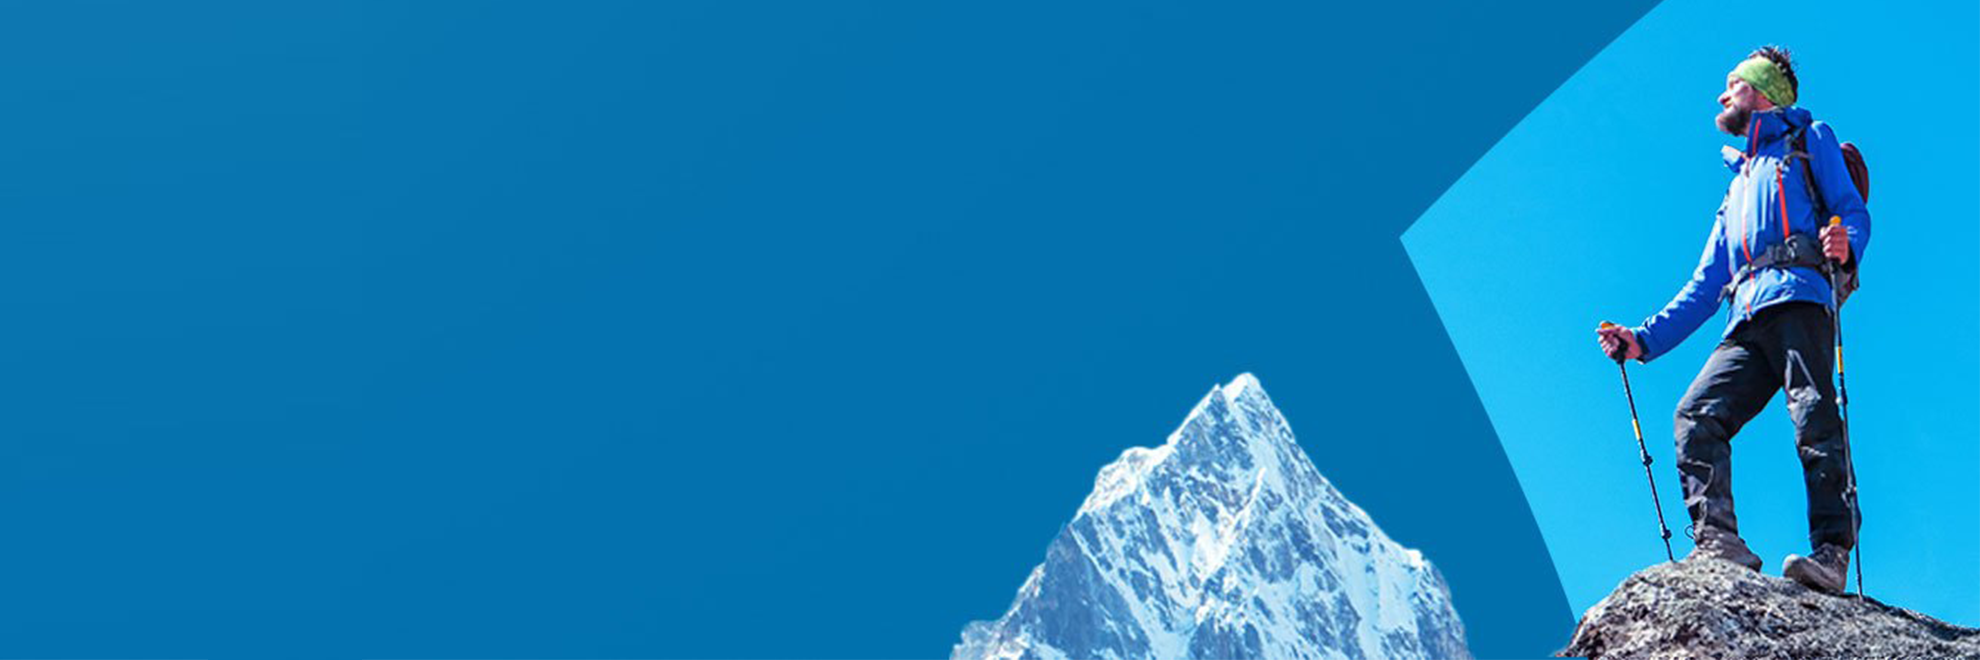 Capgemini Group positioned as a Leader in Everest Group’s PEAK Matrix™ for Advanced Analytics and Insights Services 2020